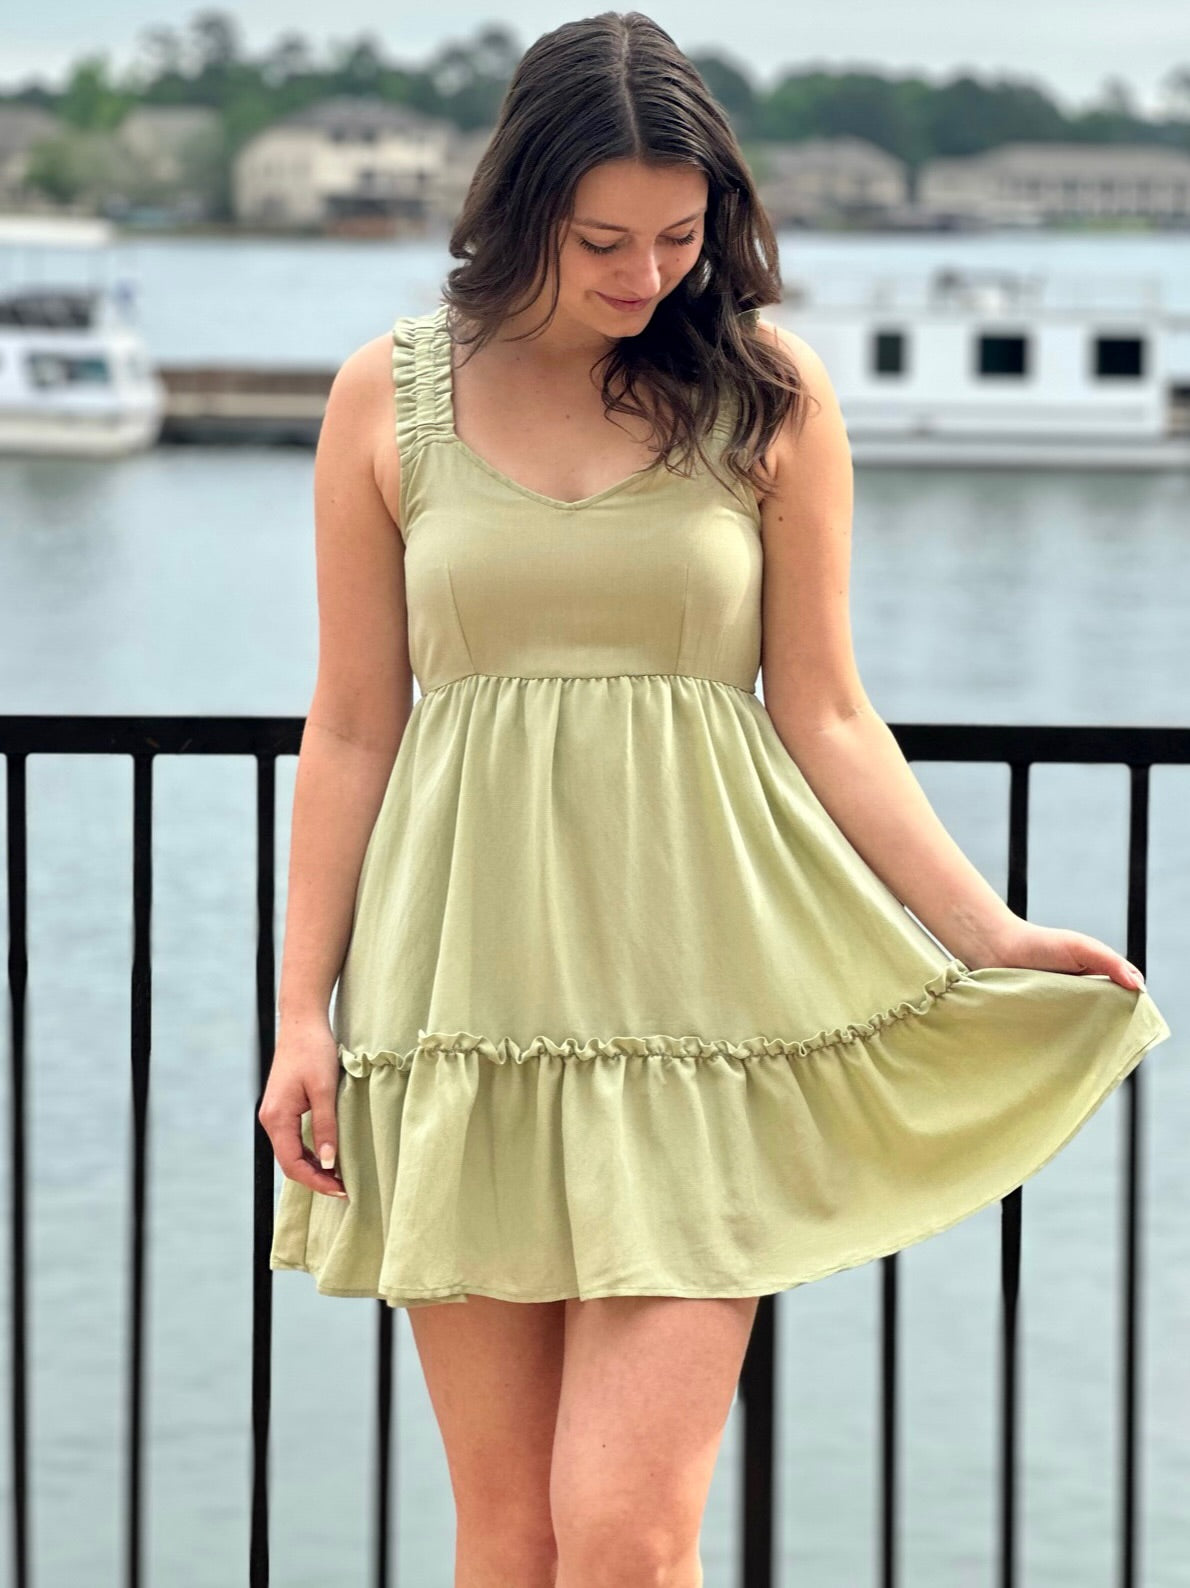 Megan in olive dress holding dress and looking down at dress